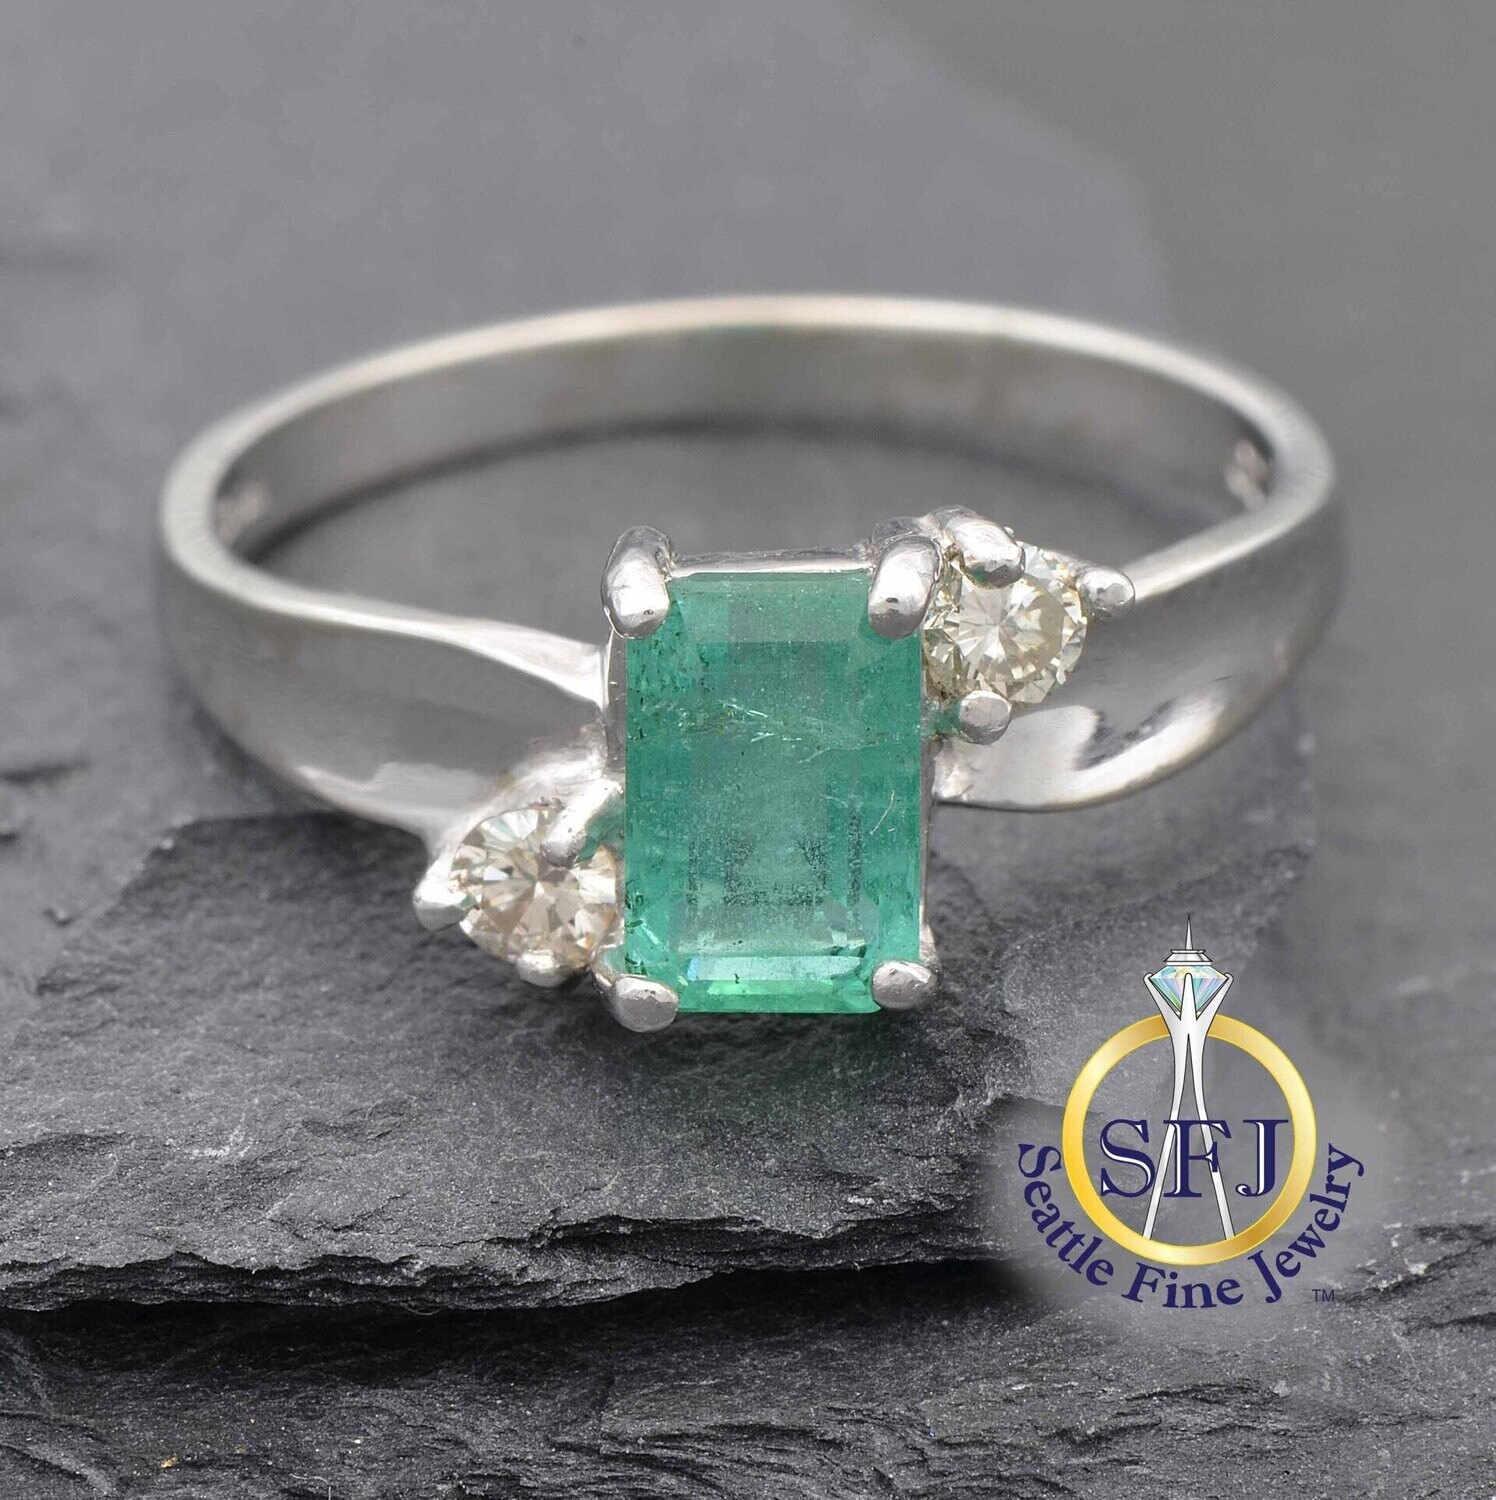 Emerald & Diamond Bypass Ring, Solid White Gold